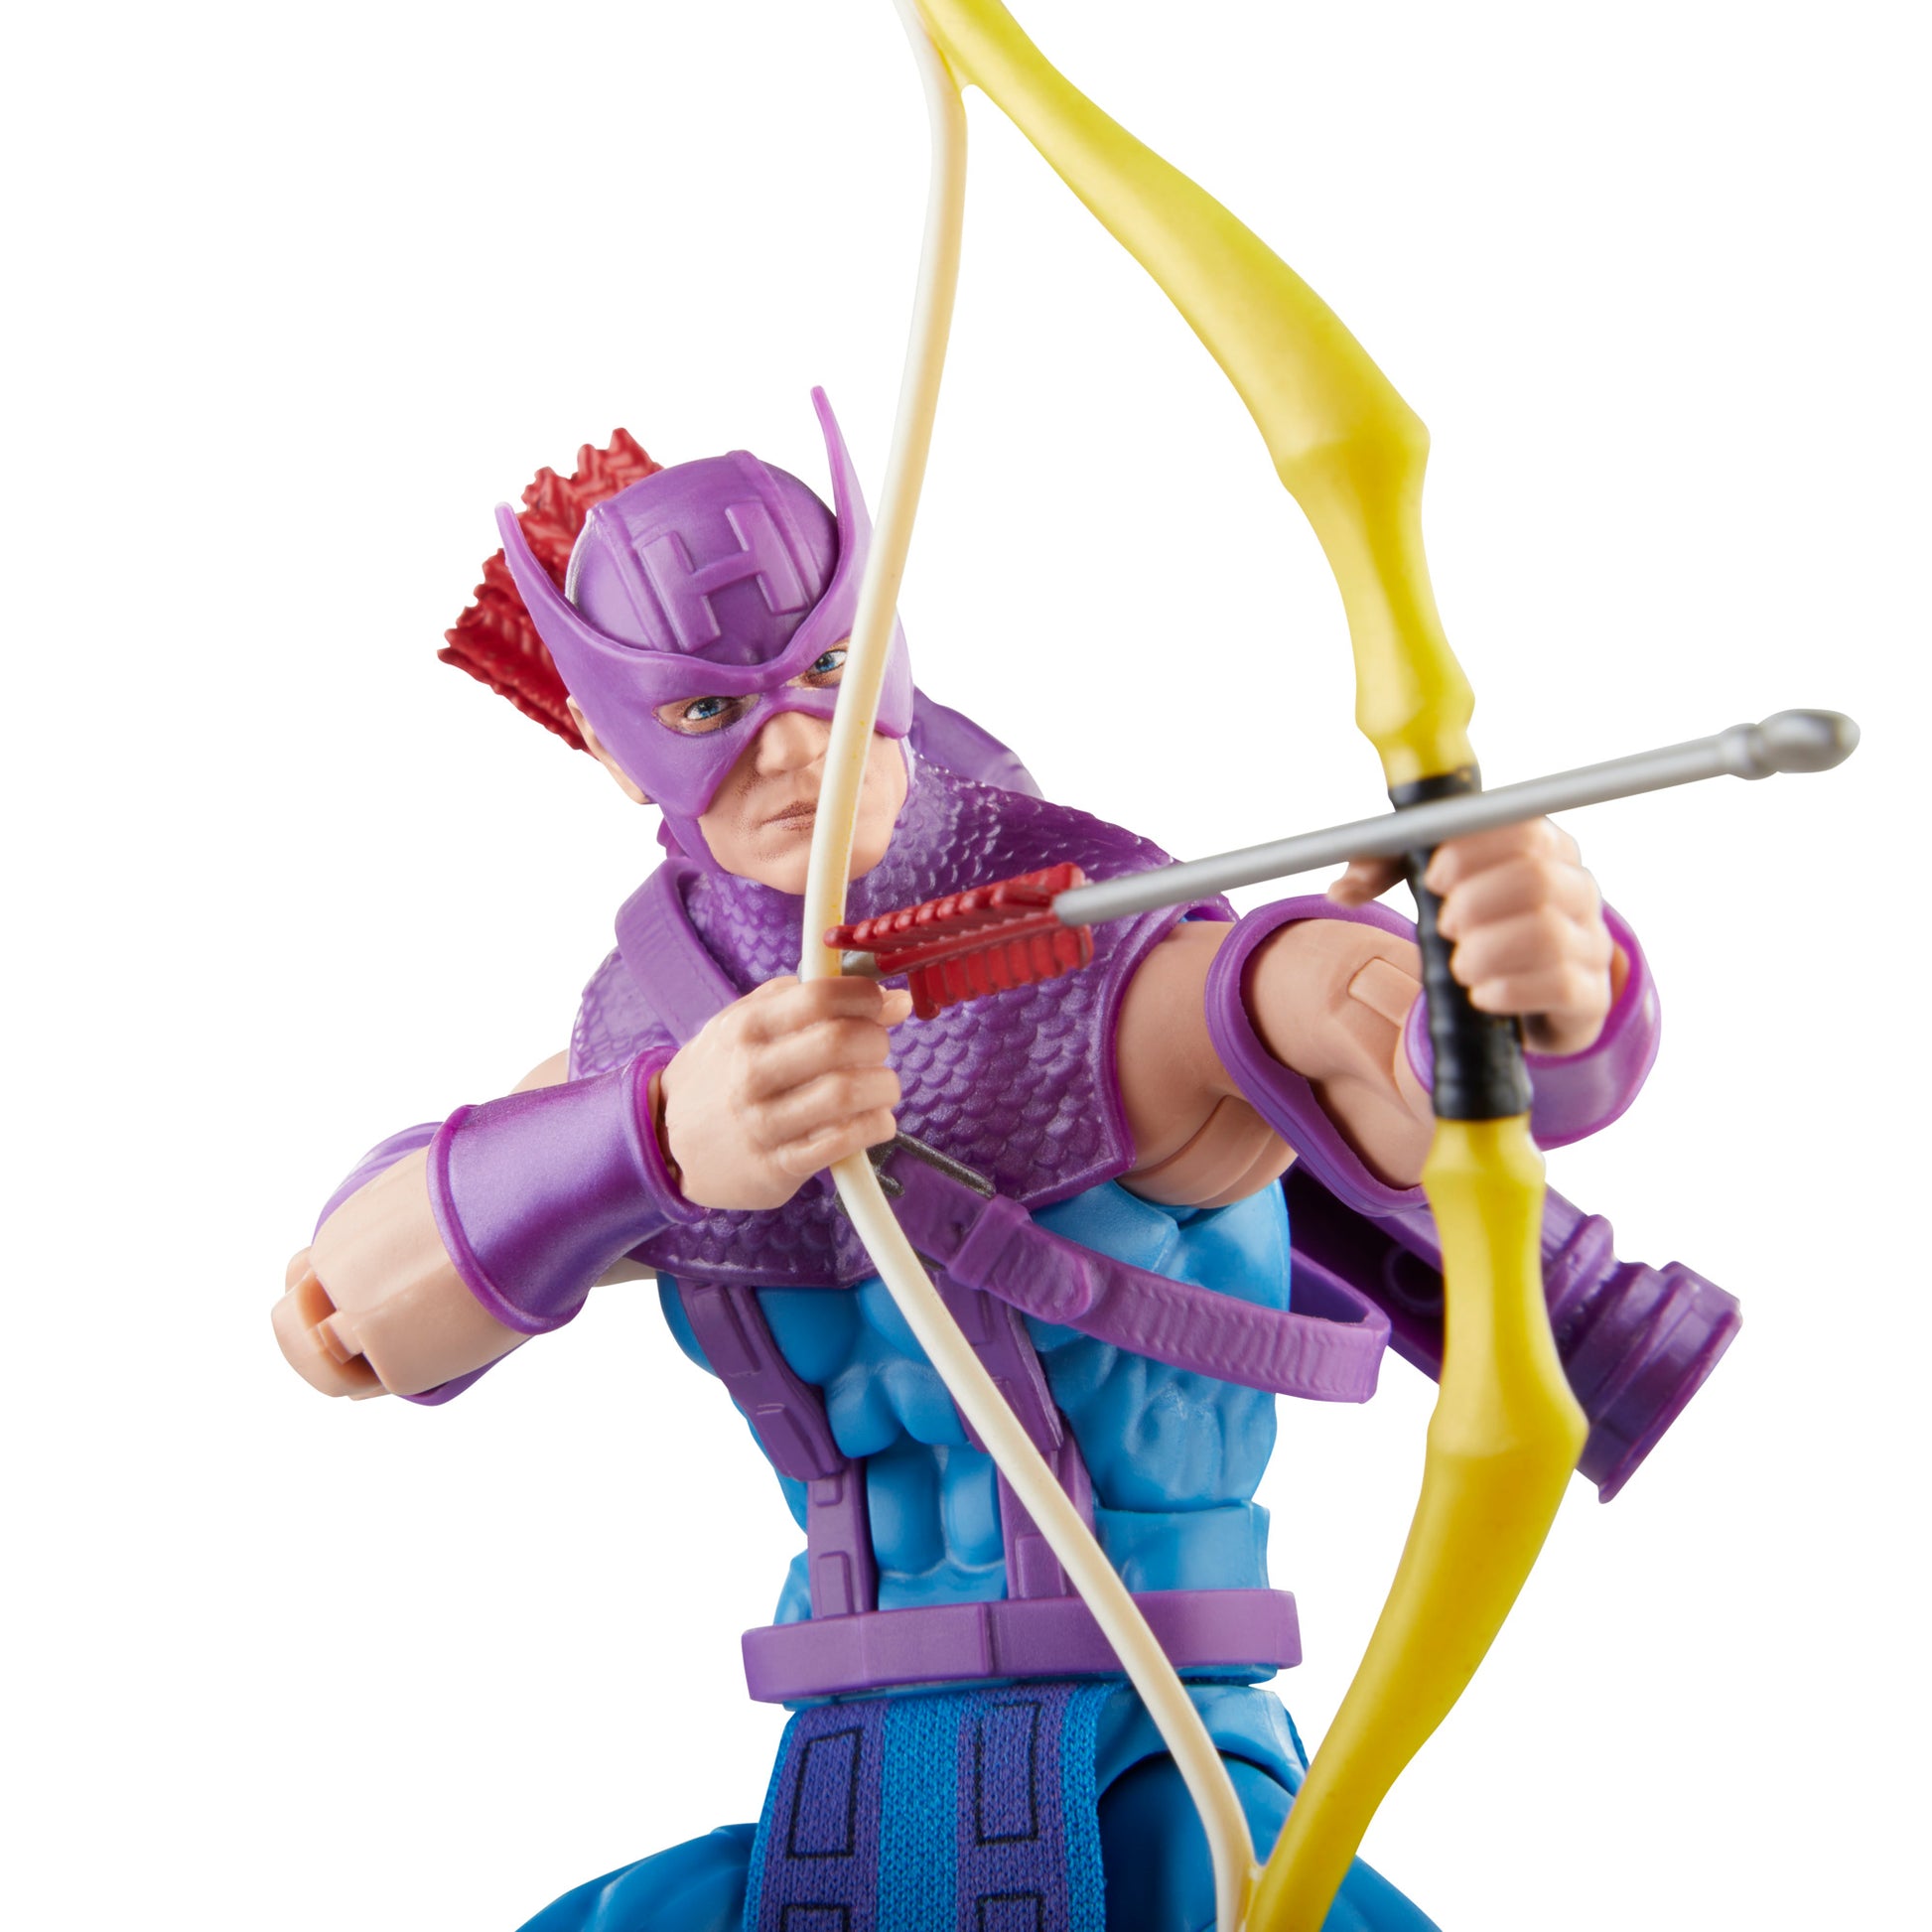 Marvel Legends Series Hawkeye with Sky-Cycle Action Figure Toy close up - Heretoserveyou